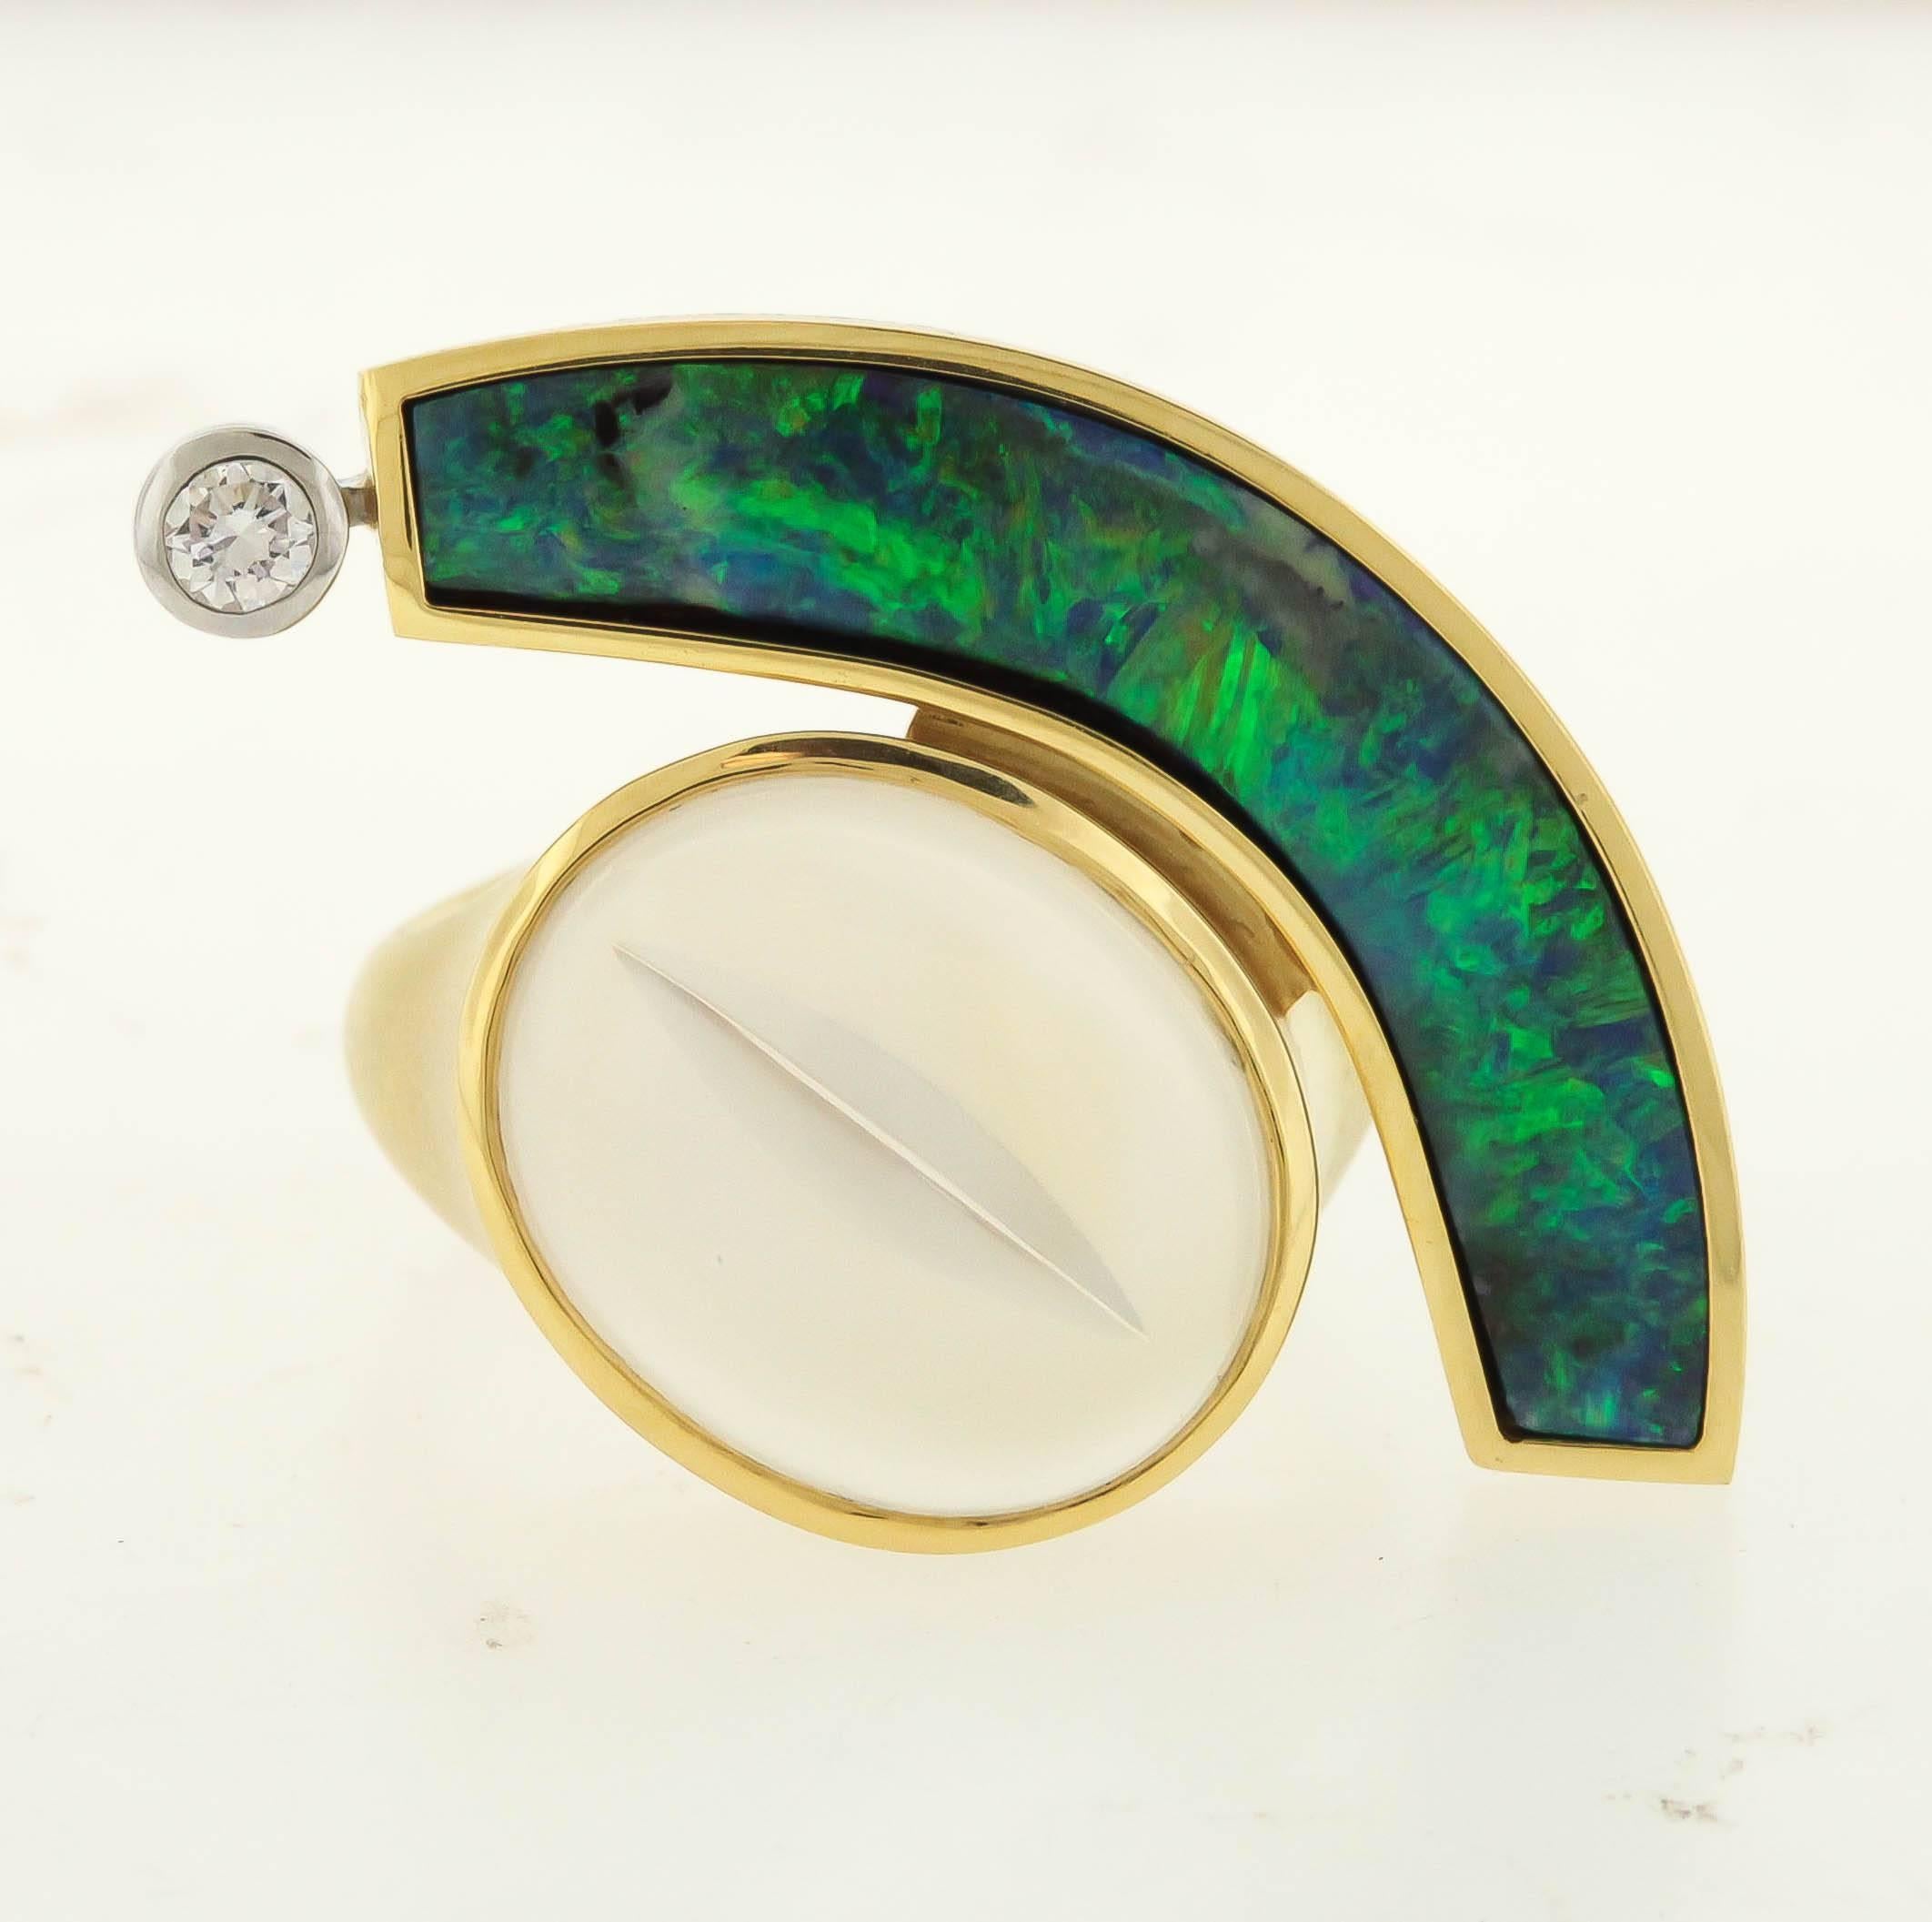 Magnificent boulder opal, 4.68 carats, is cut in a crescent that wraps around a luminous moonstone with a cat's eye facet by Tom Munsteiner, accented in the 18K gold mounting with an 0.08 ct. diamond.  The ring measures 1